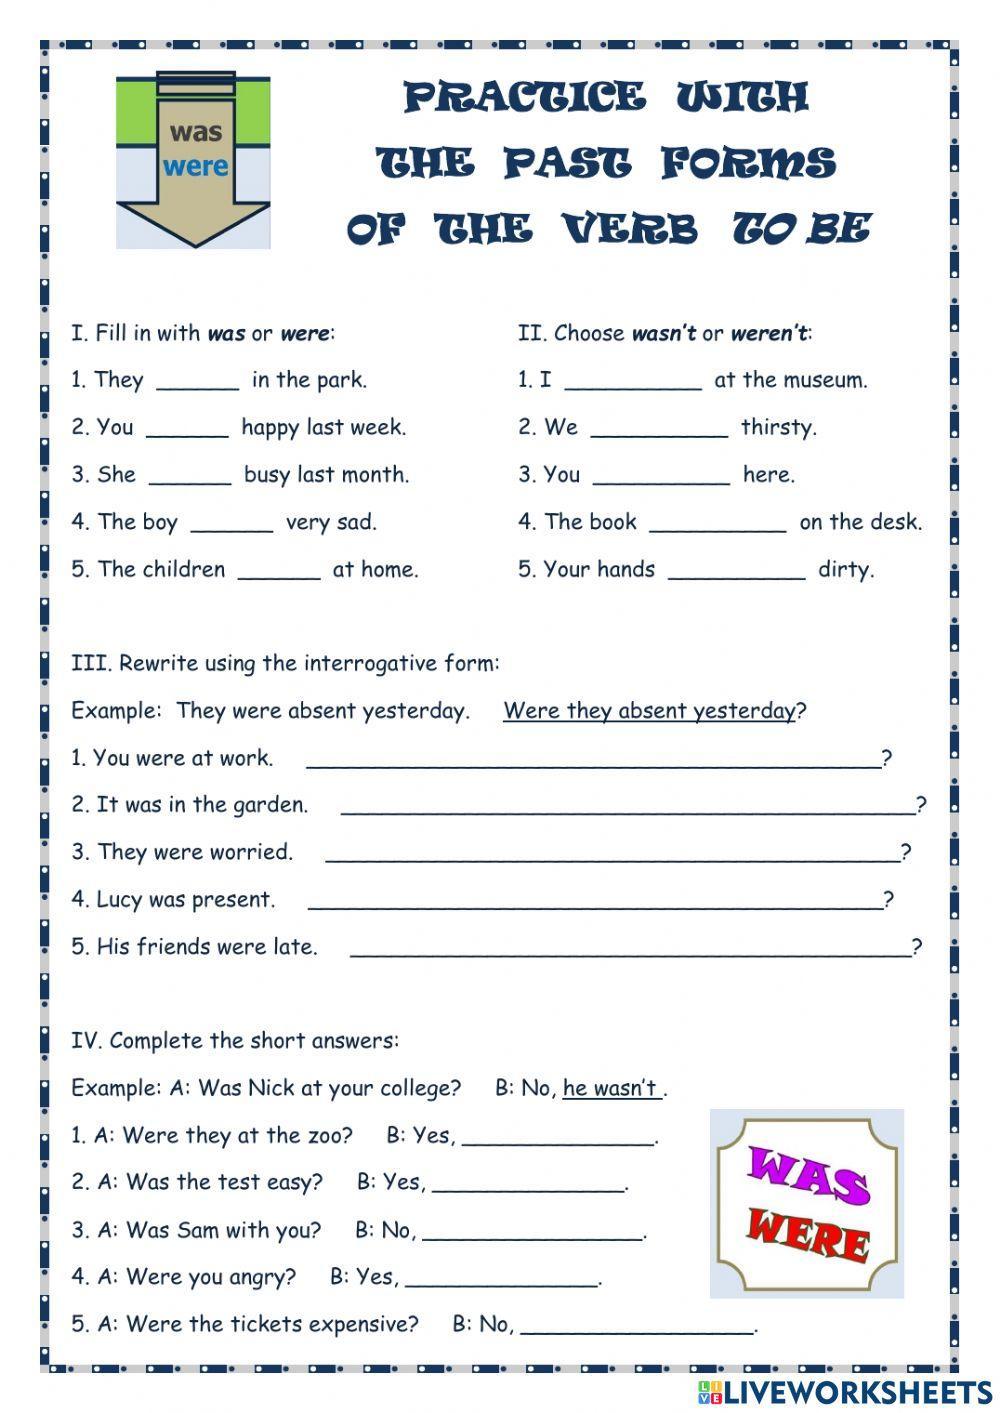 Practice with the past forms of the verb to be